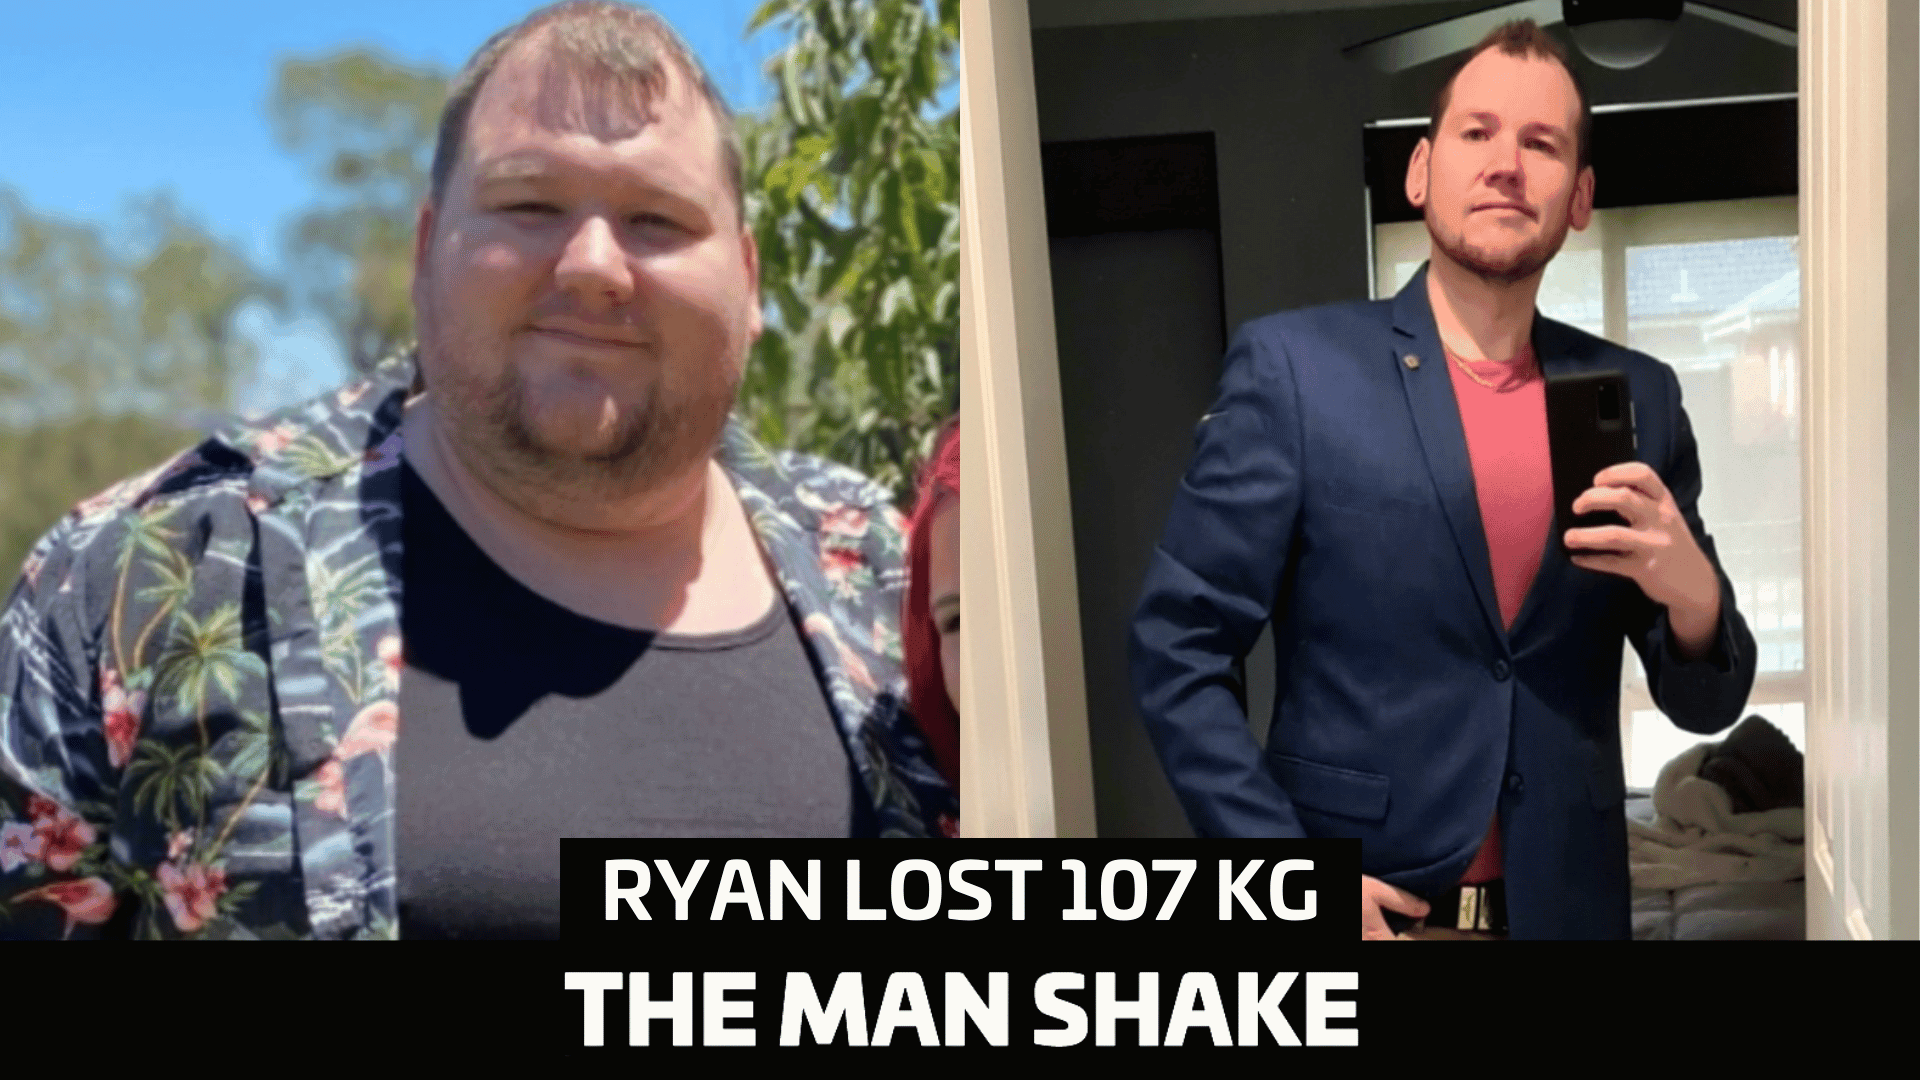 Ryan stuck with the Man Shakes and has now lost 107kg